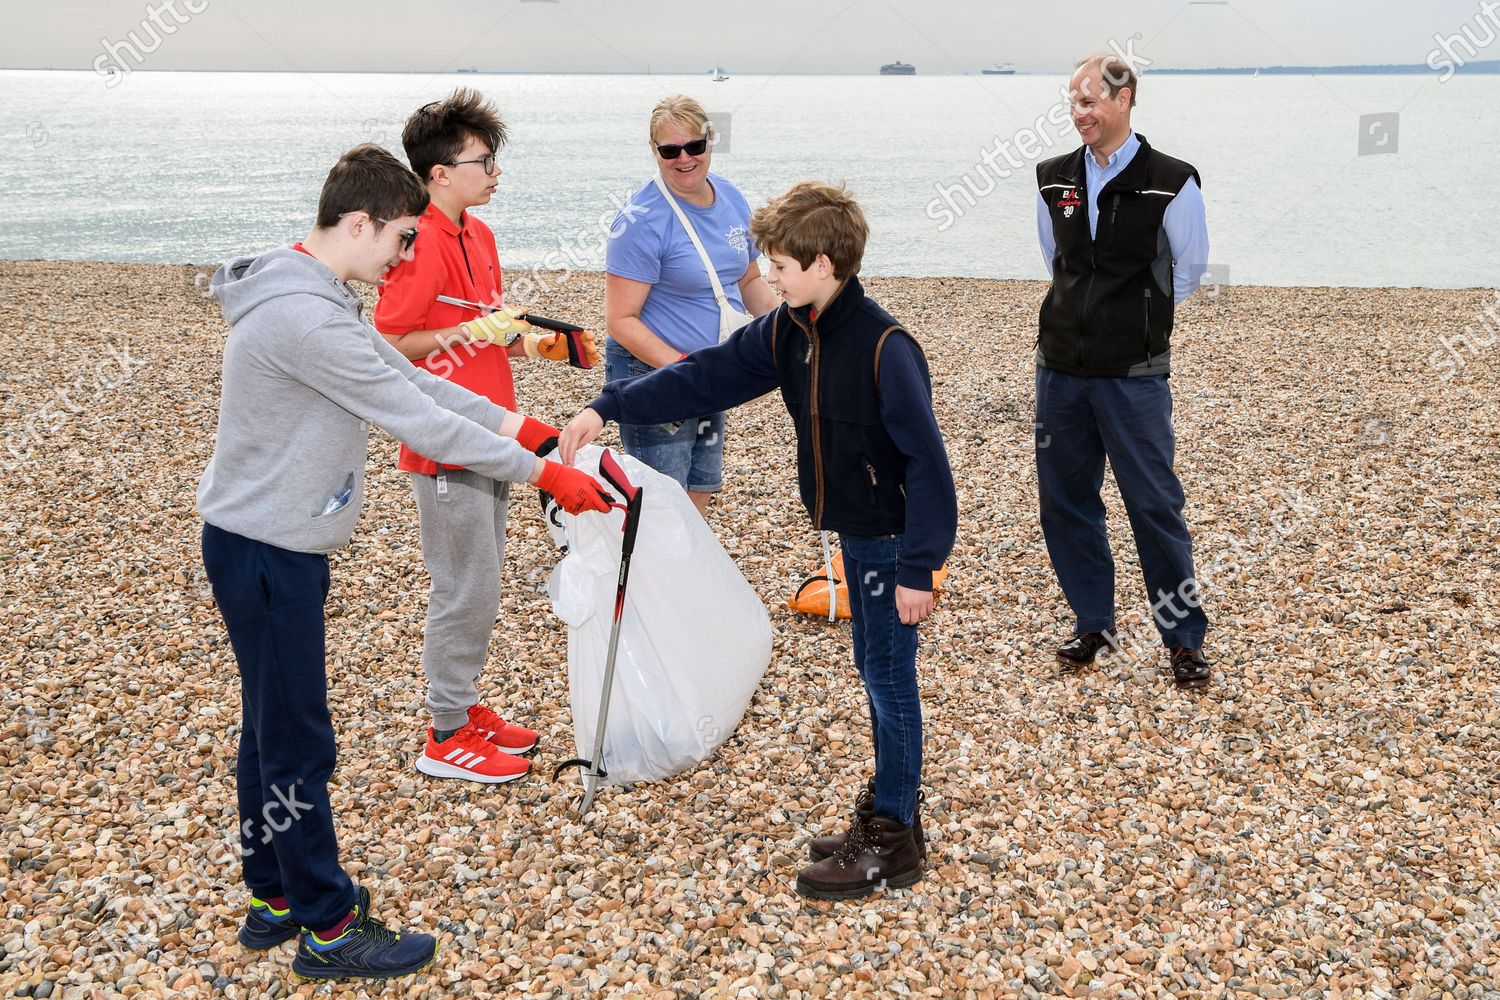 prince-edward-and-sophie-countess-of-wessex-great-british-beach-clean-southsea-beach-portsmouth-uk-shutterstock-editorial-10782998ar.jpg